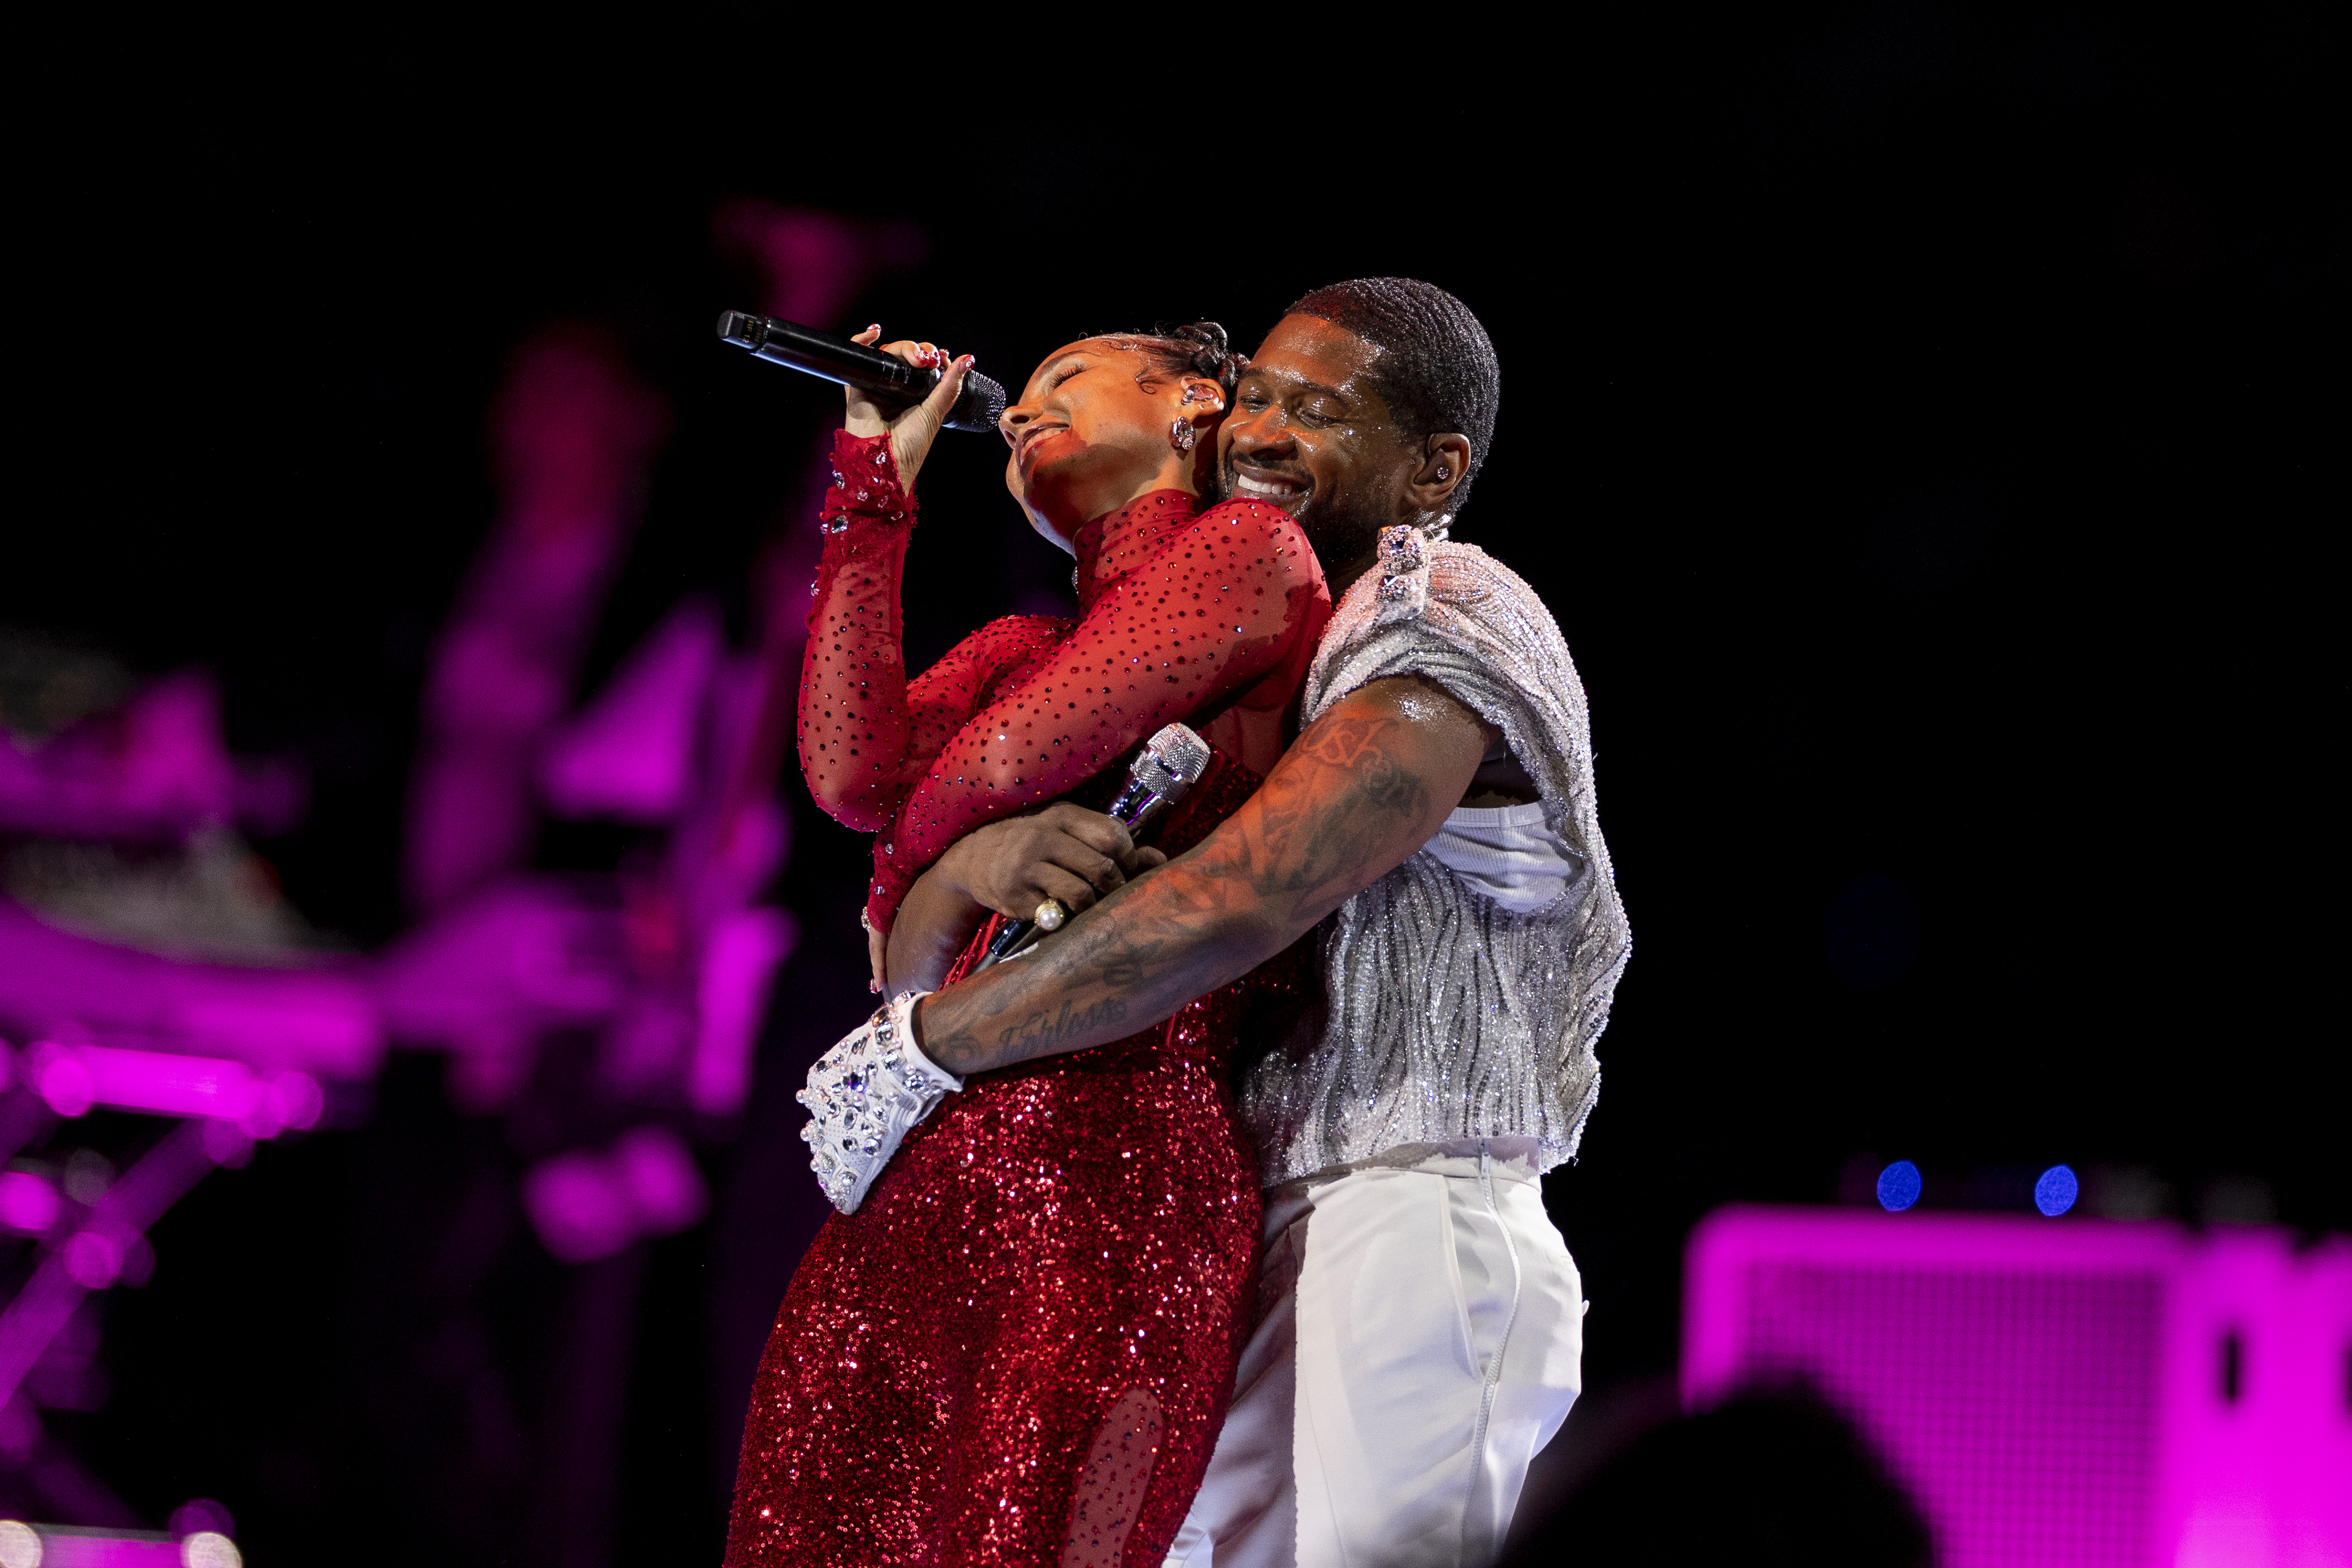 Usher hugging Alicia performers embracing while one holds a microphone, both in sparkly stage outfits